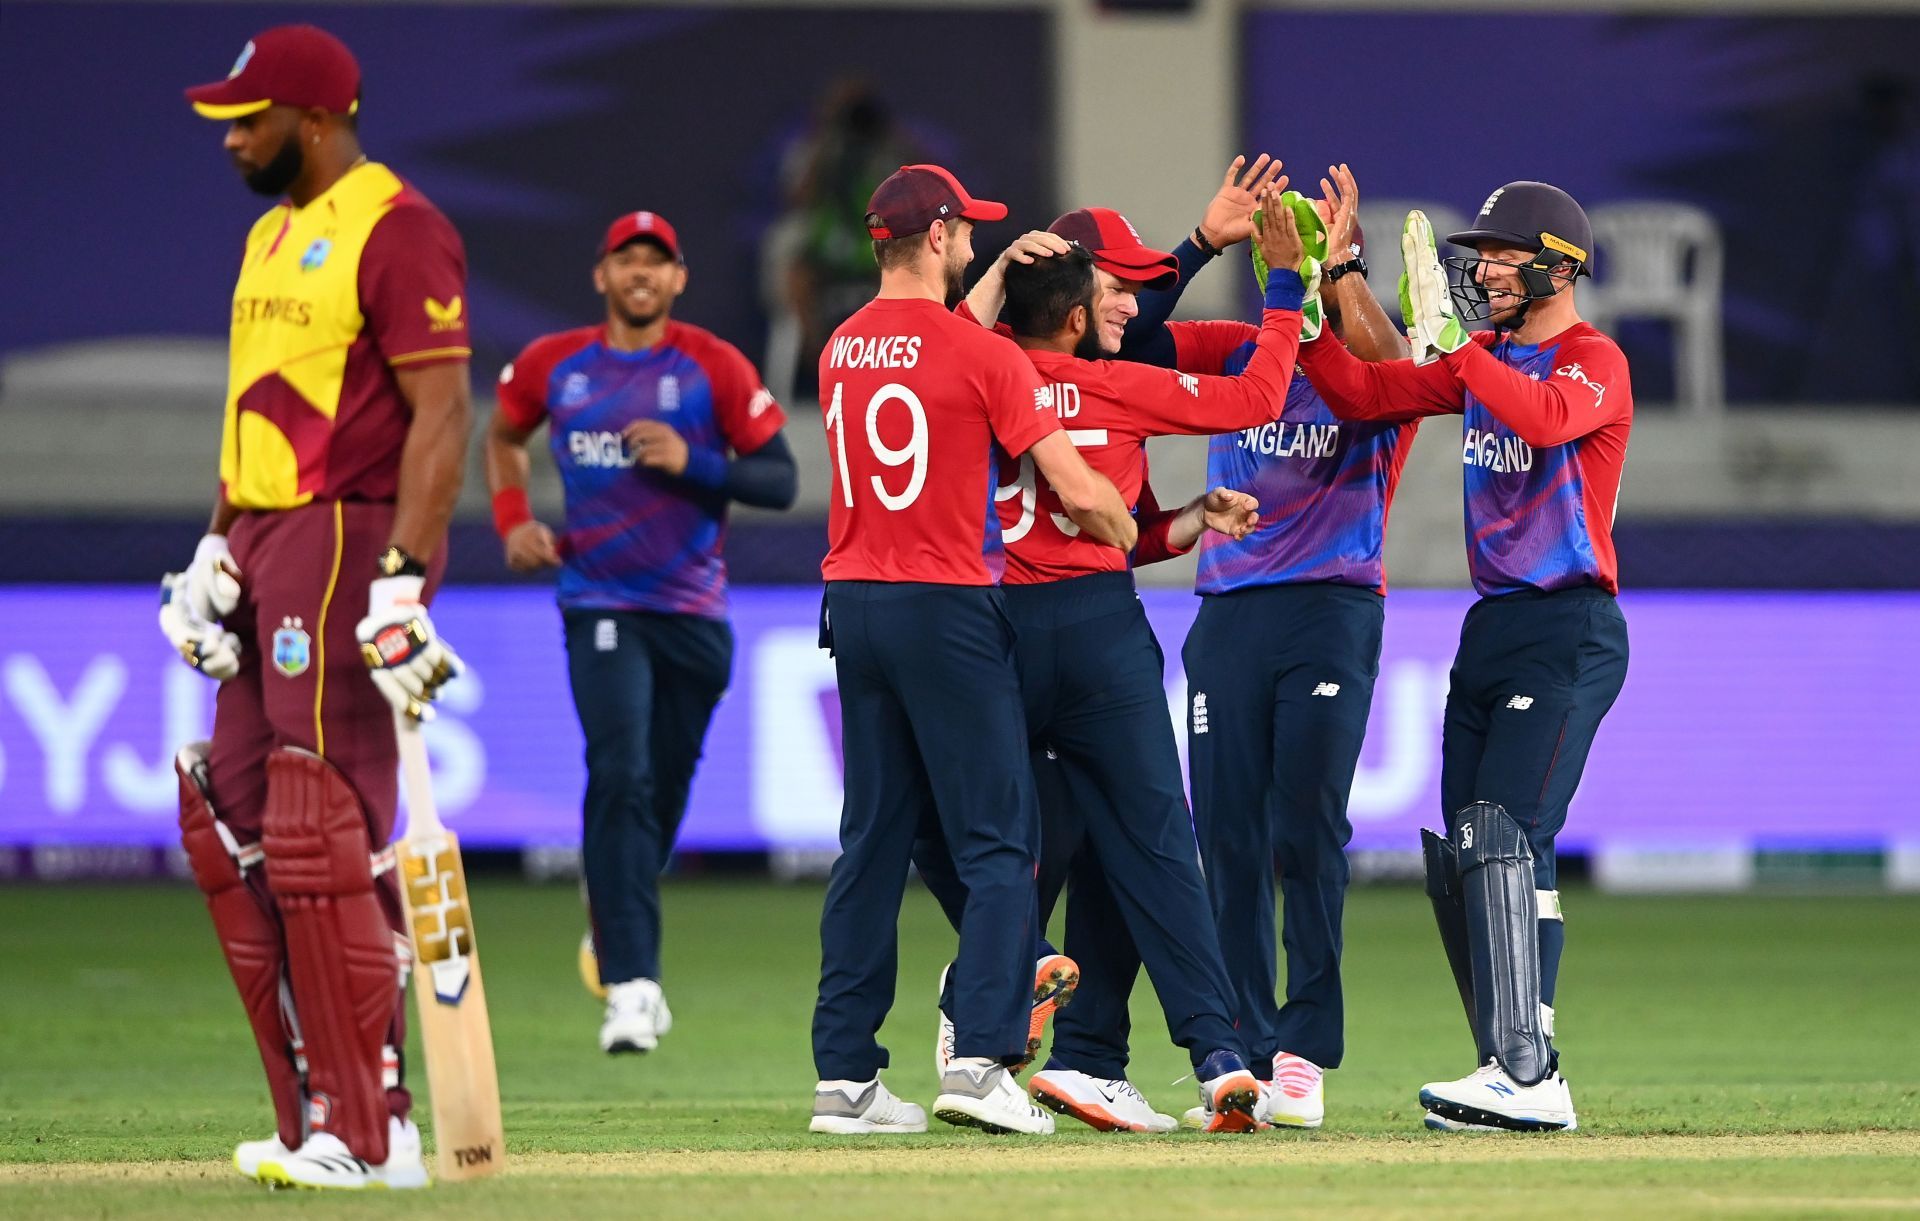 England are set to play the West Indies across 5 T20 internationals in Barbados later this month.